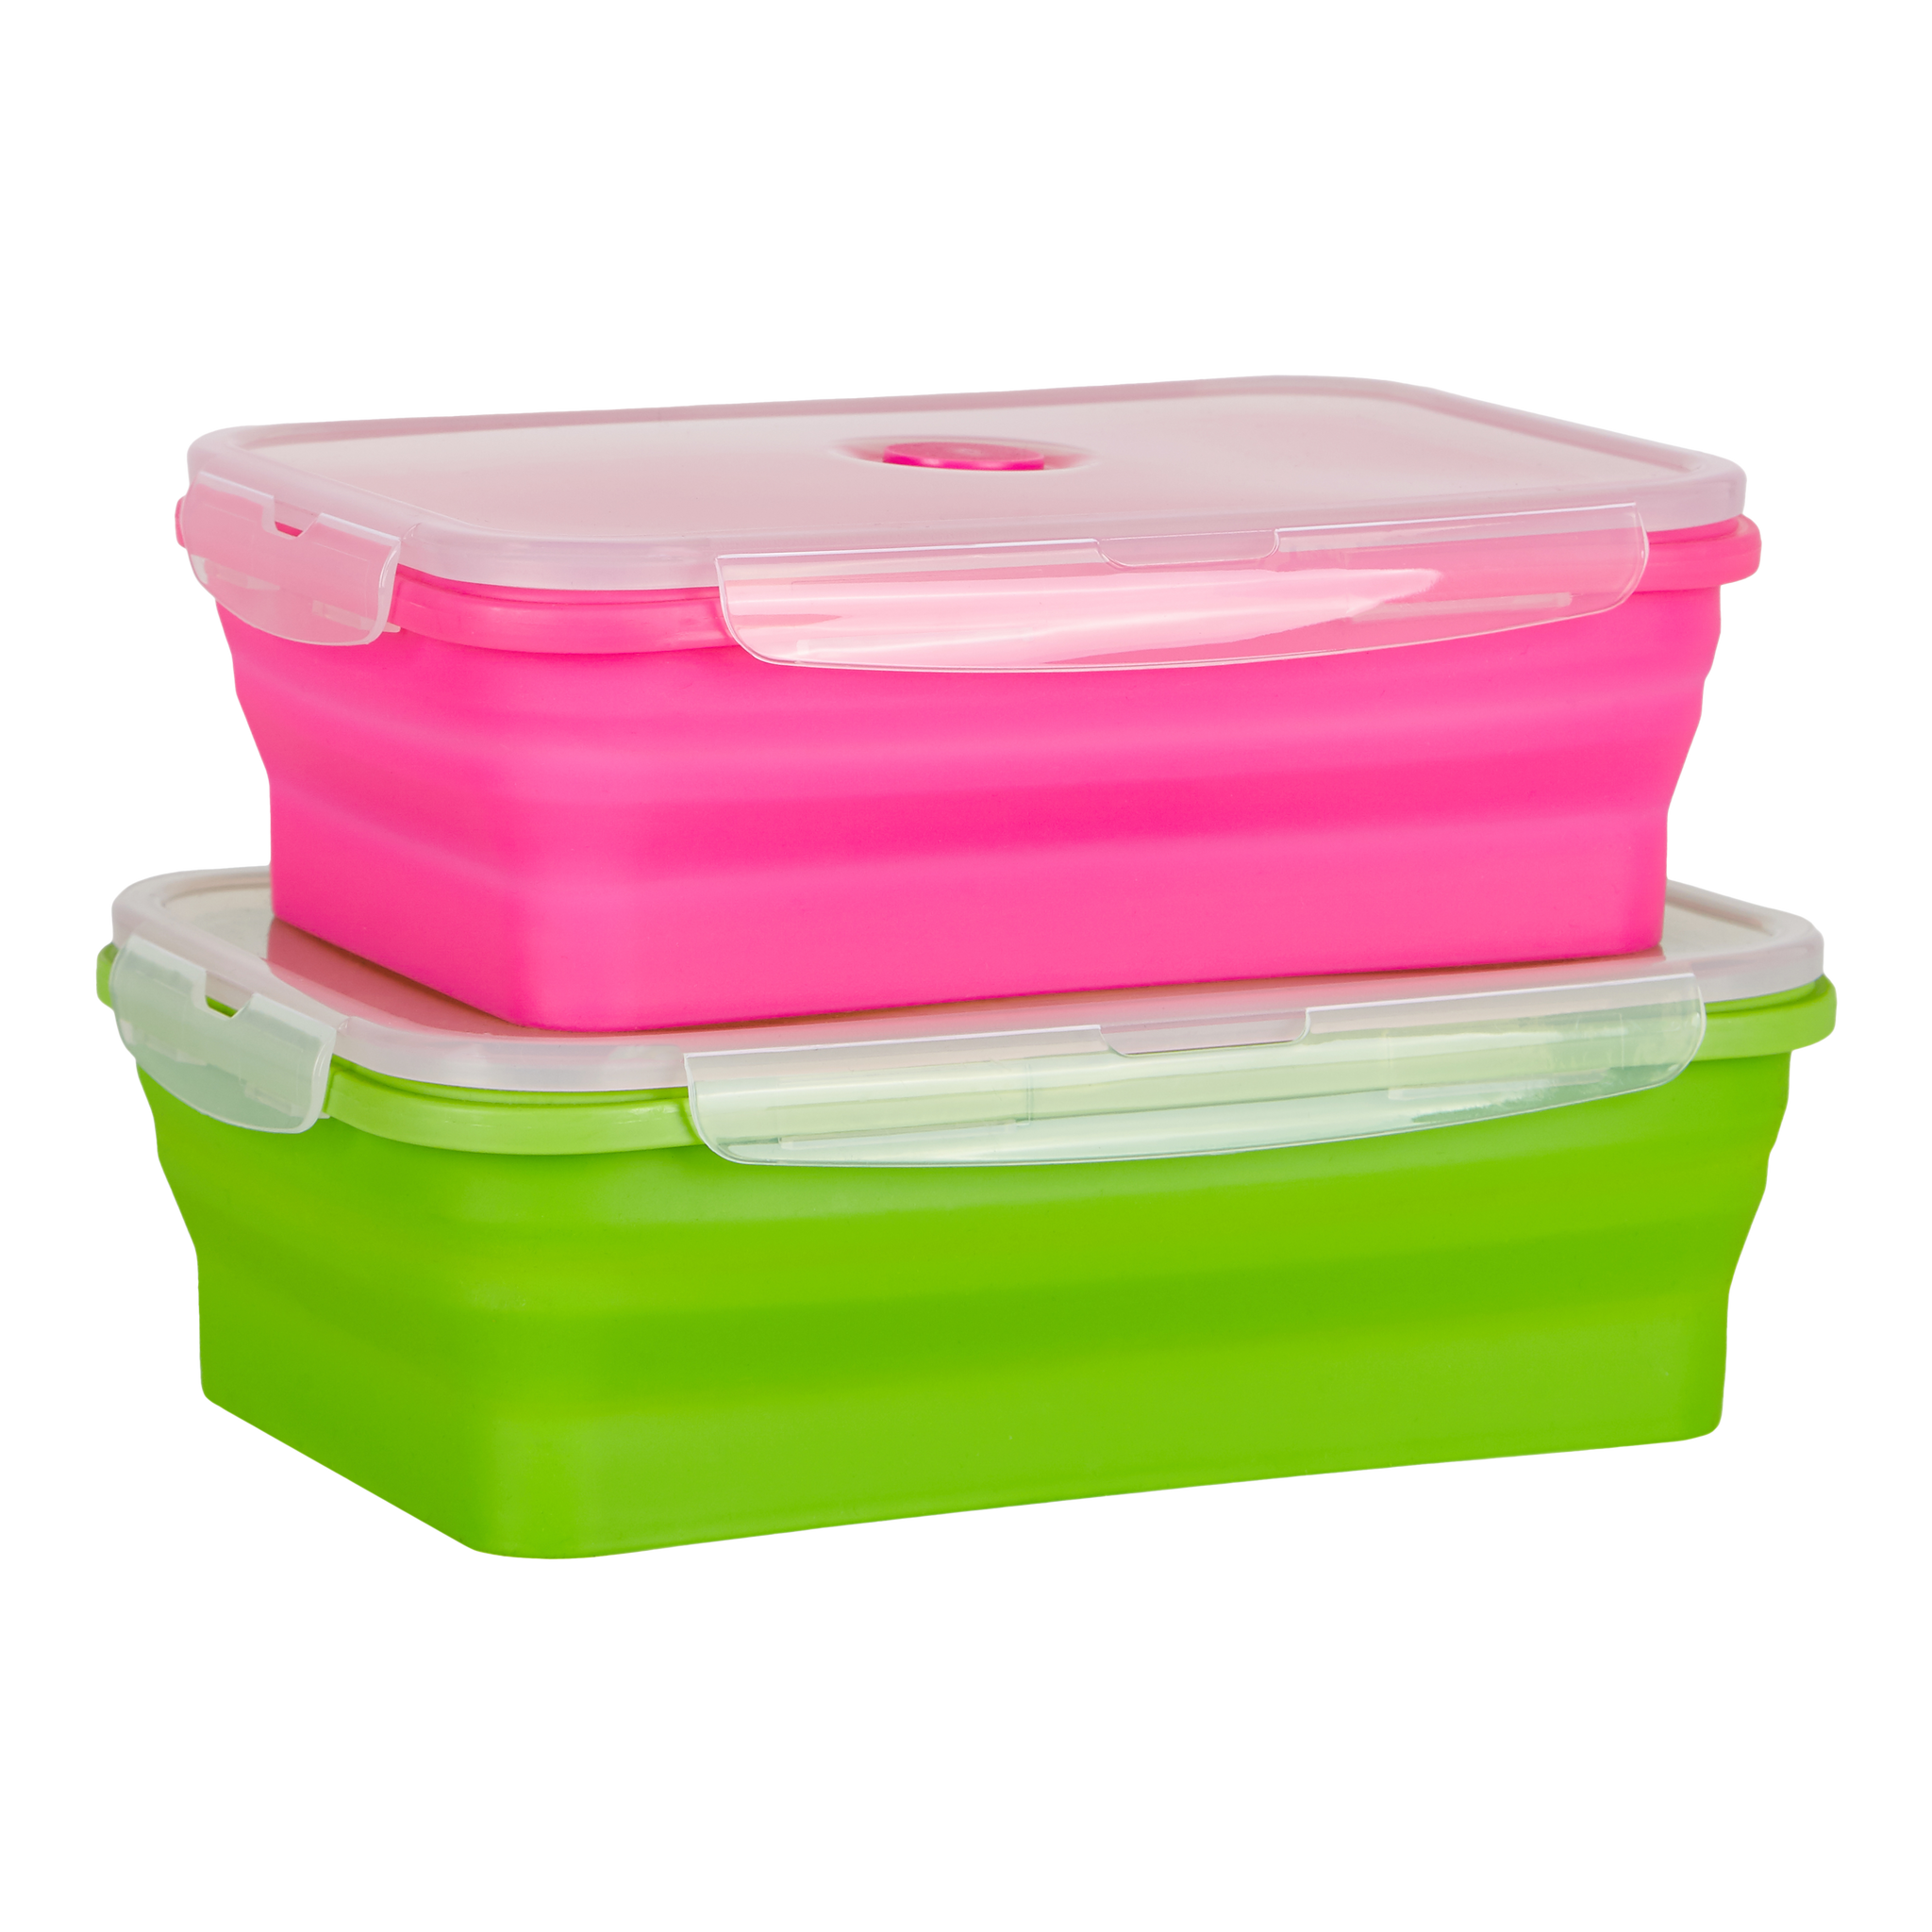 Meal Prep Pack + FREE Snack Pack Set - Flat Stacks USA